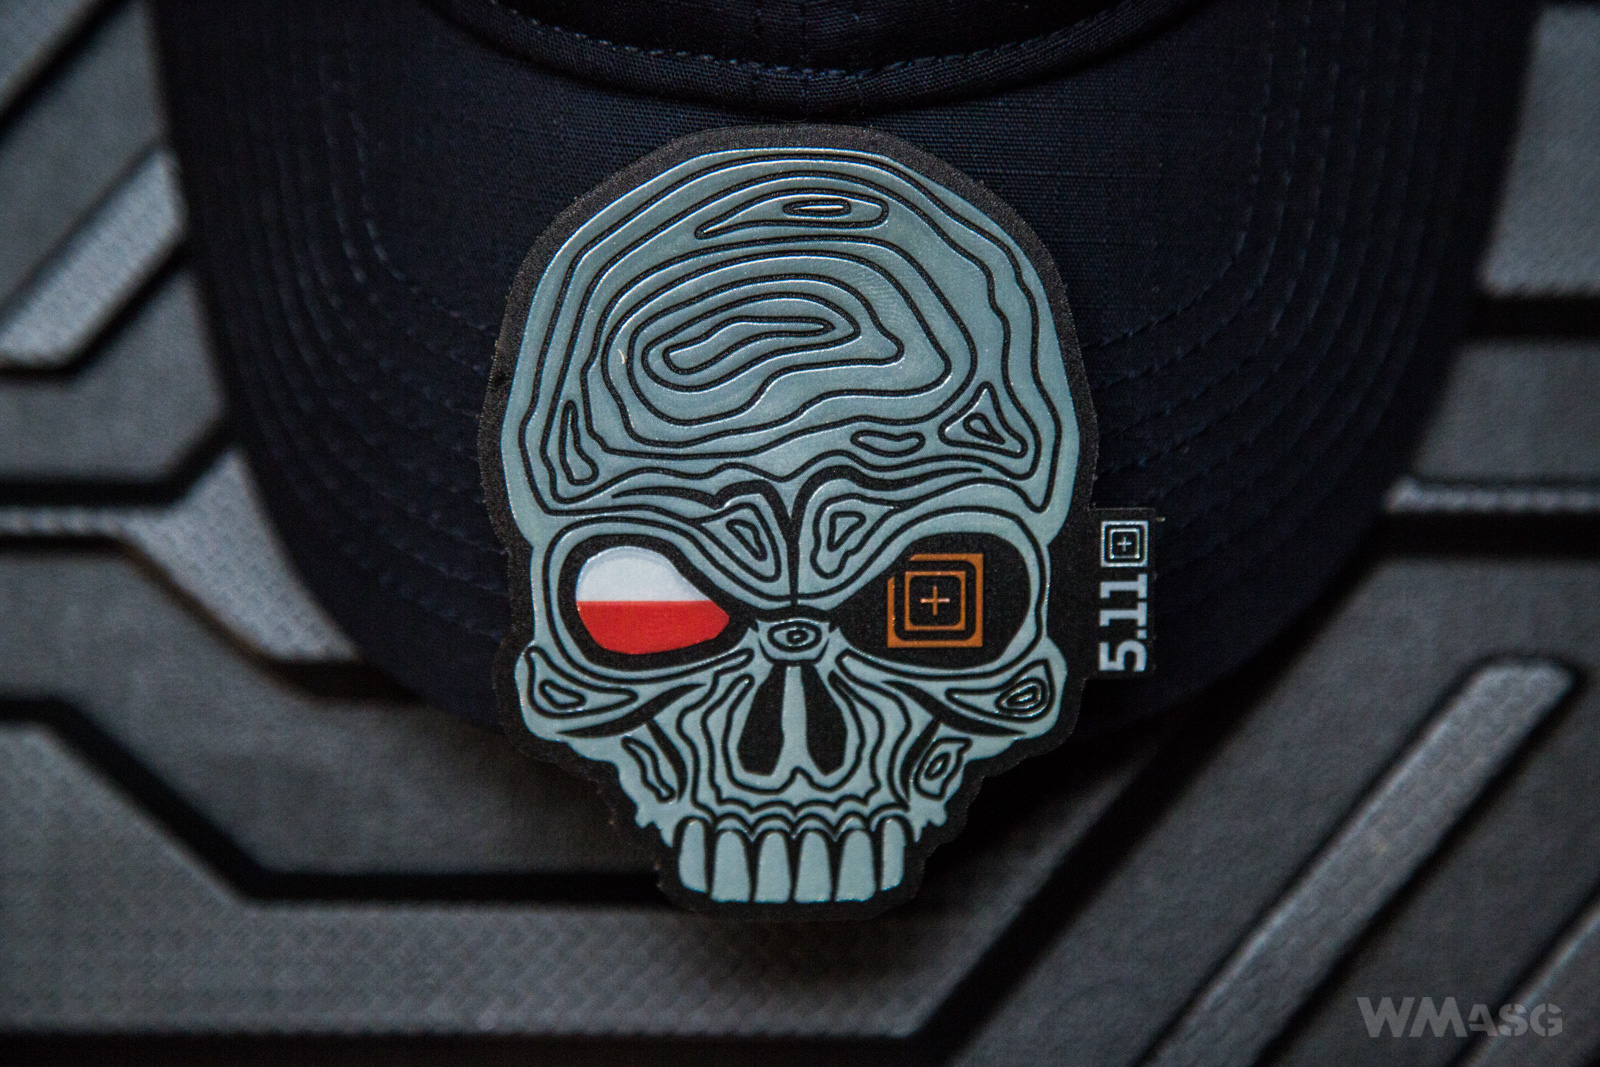 The 5.11 Tactical limited edition patch with Polish colours